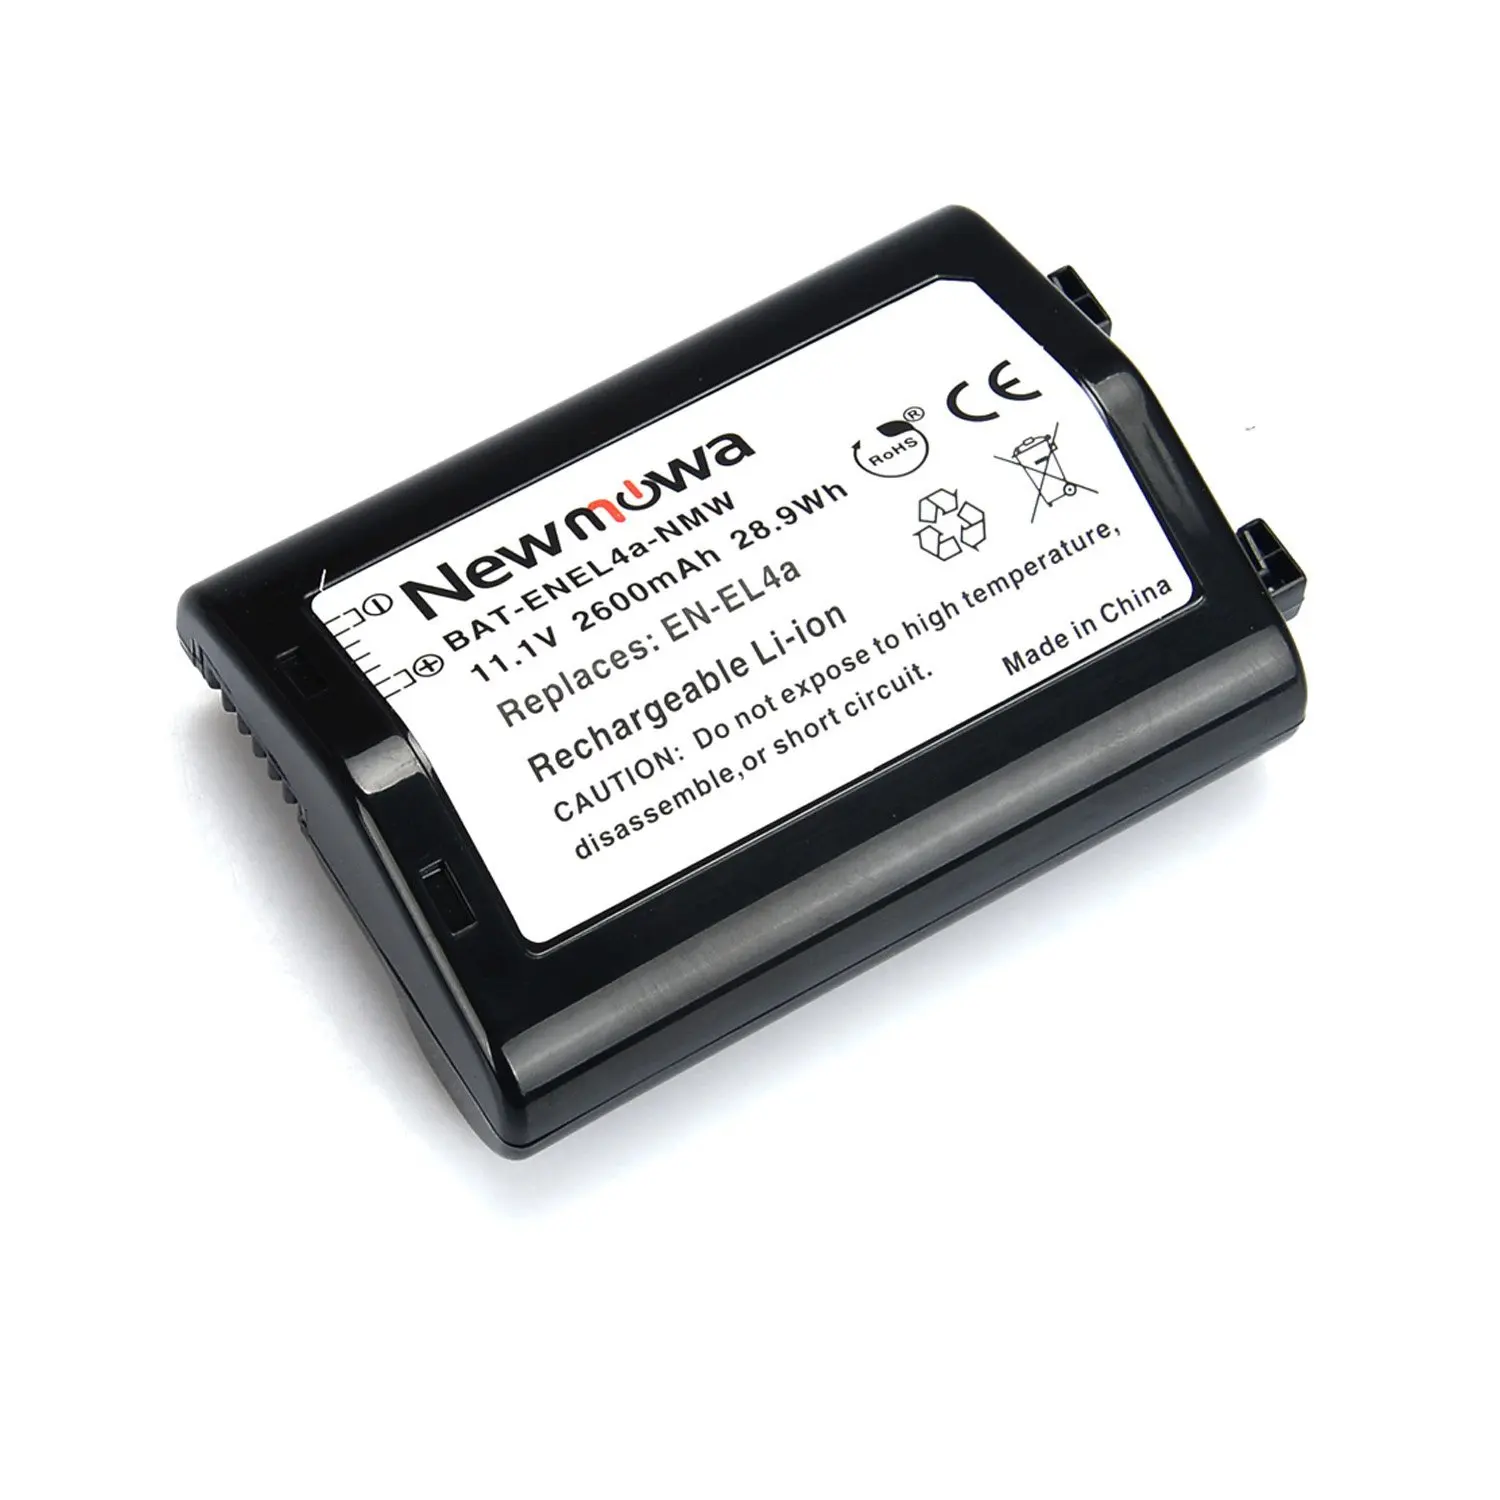 Find battery. Battery for Nikon d4.